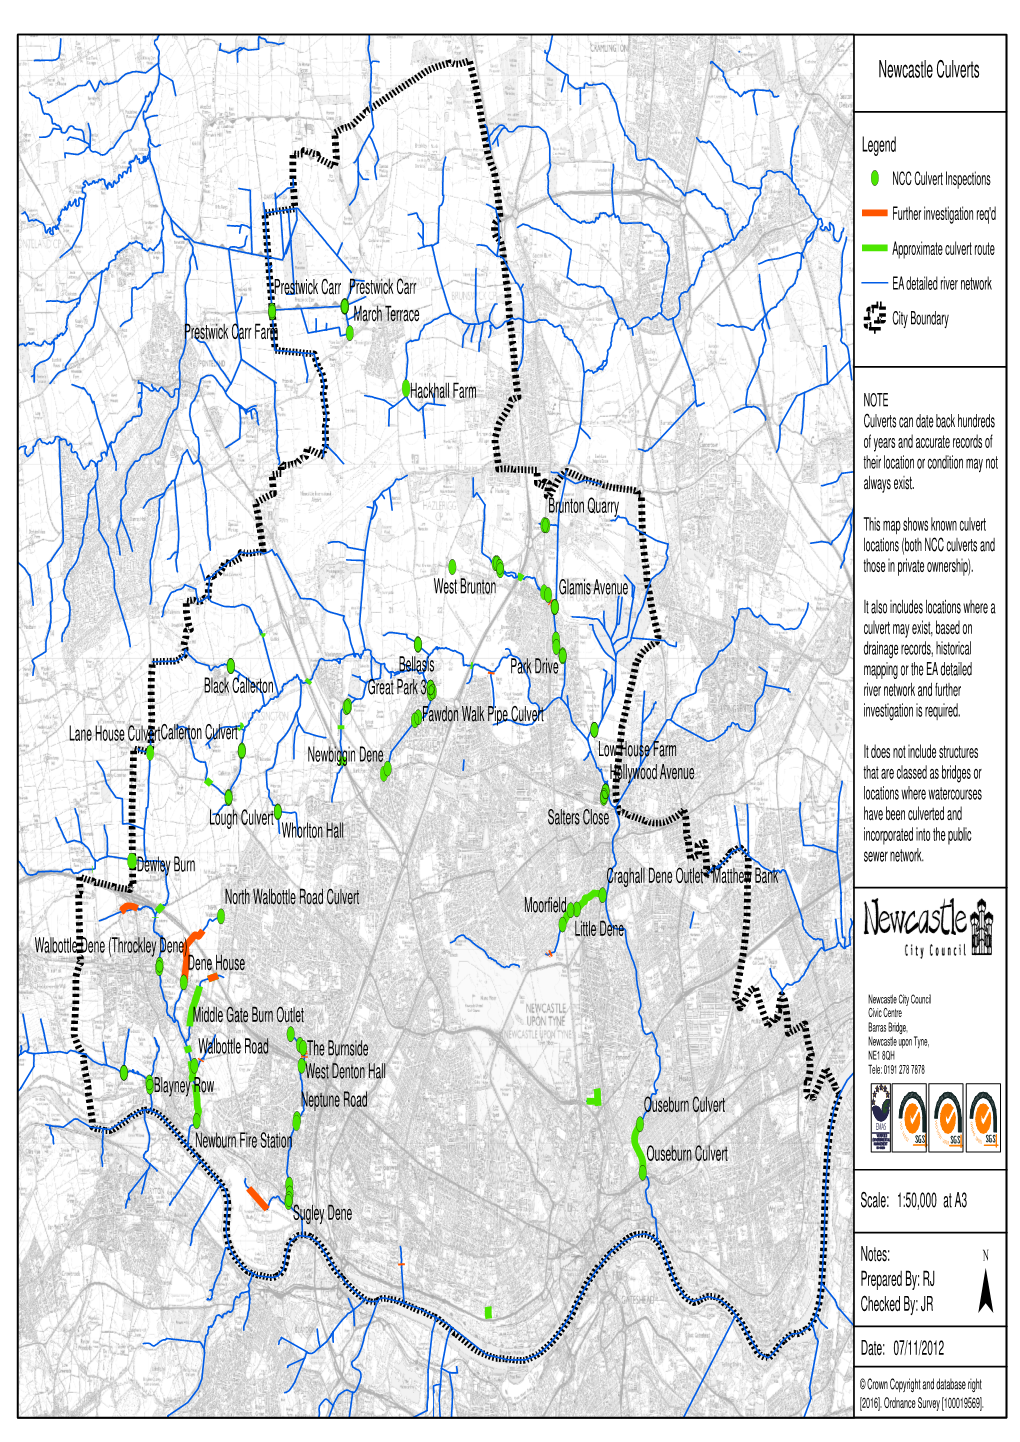 Map Shows Known Culvert Locations (Both NCC Culverts and (! ((!!(! Those in Private Ownership)